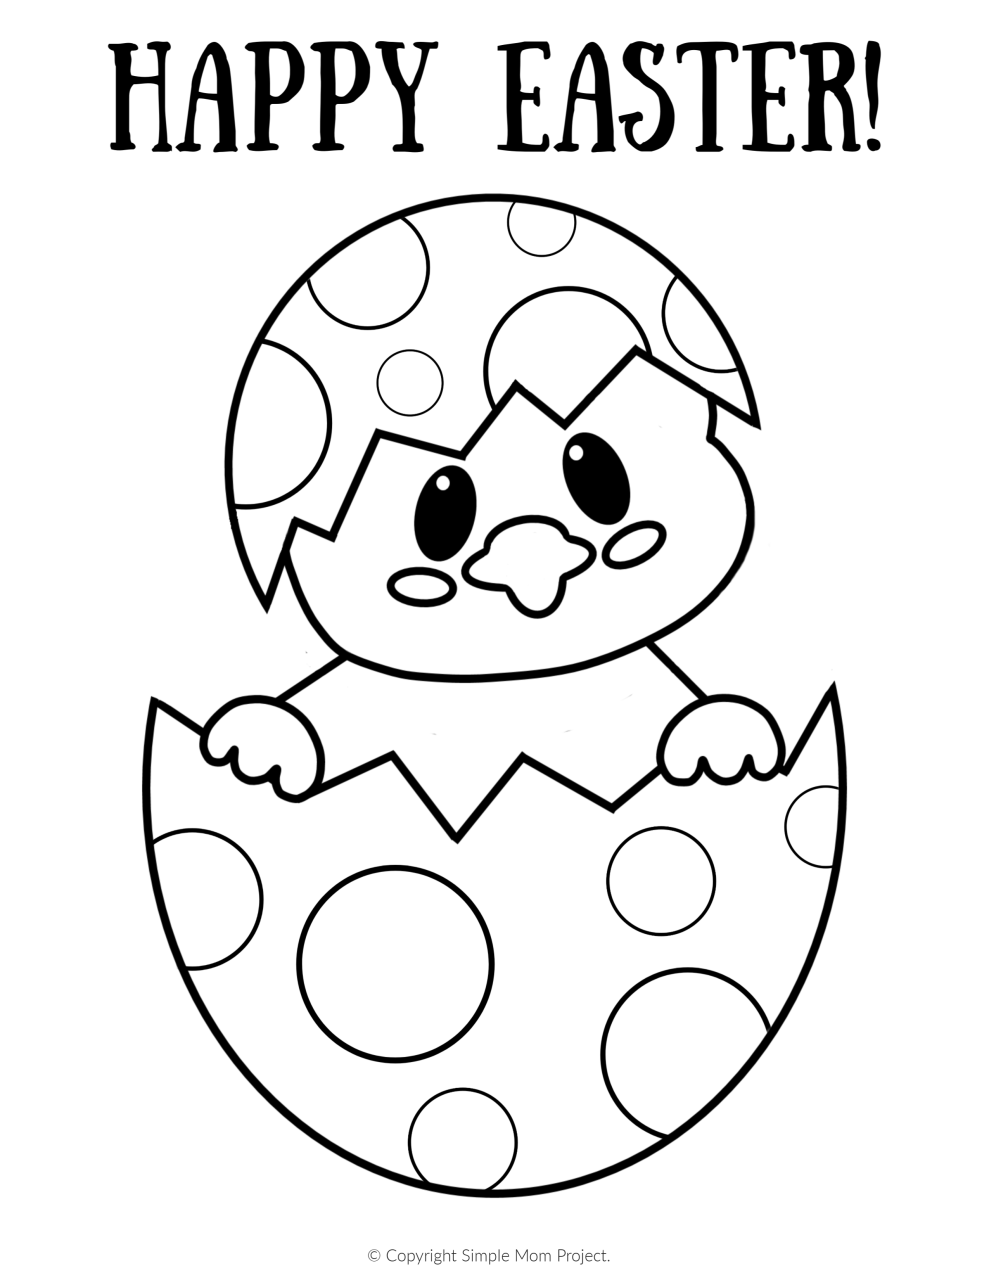 Free Printable Easter Egg Coloring Pages For